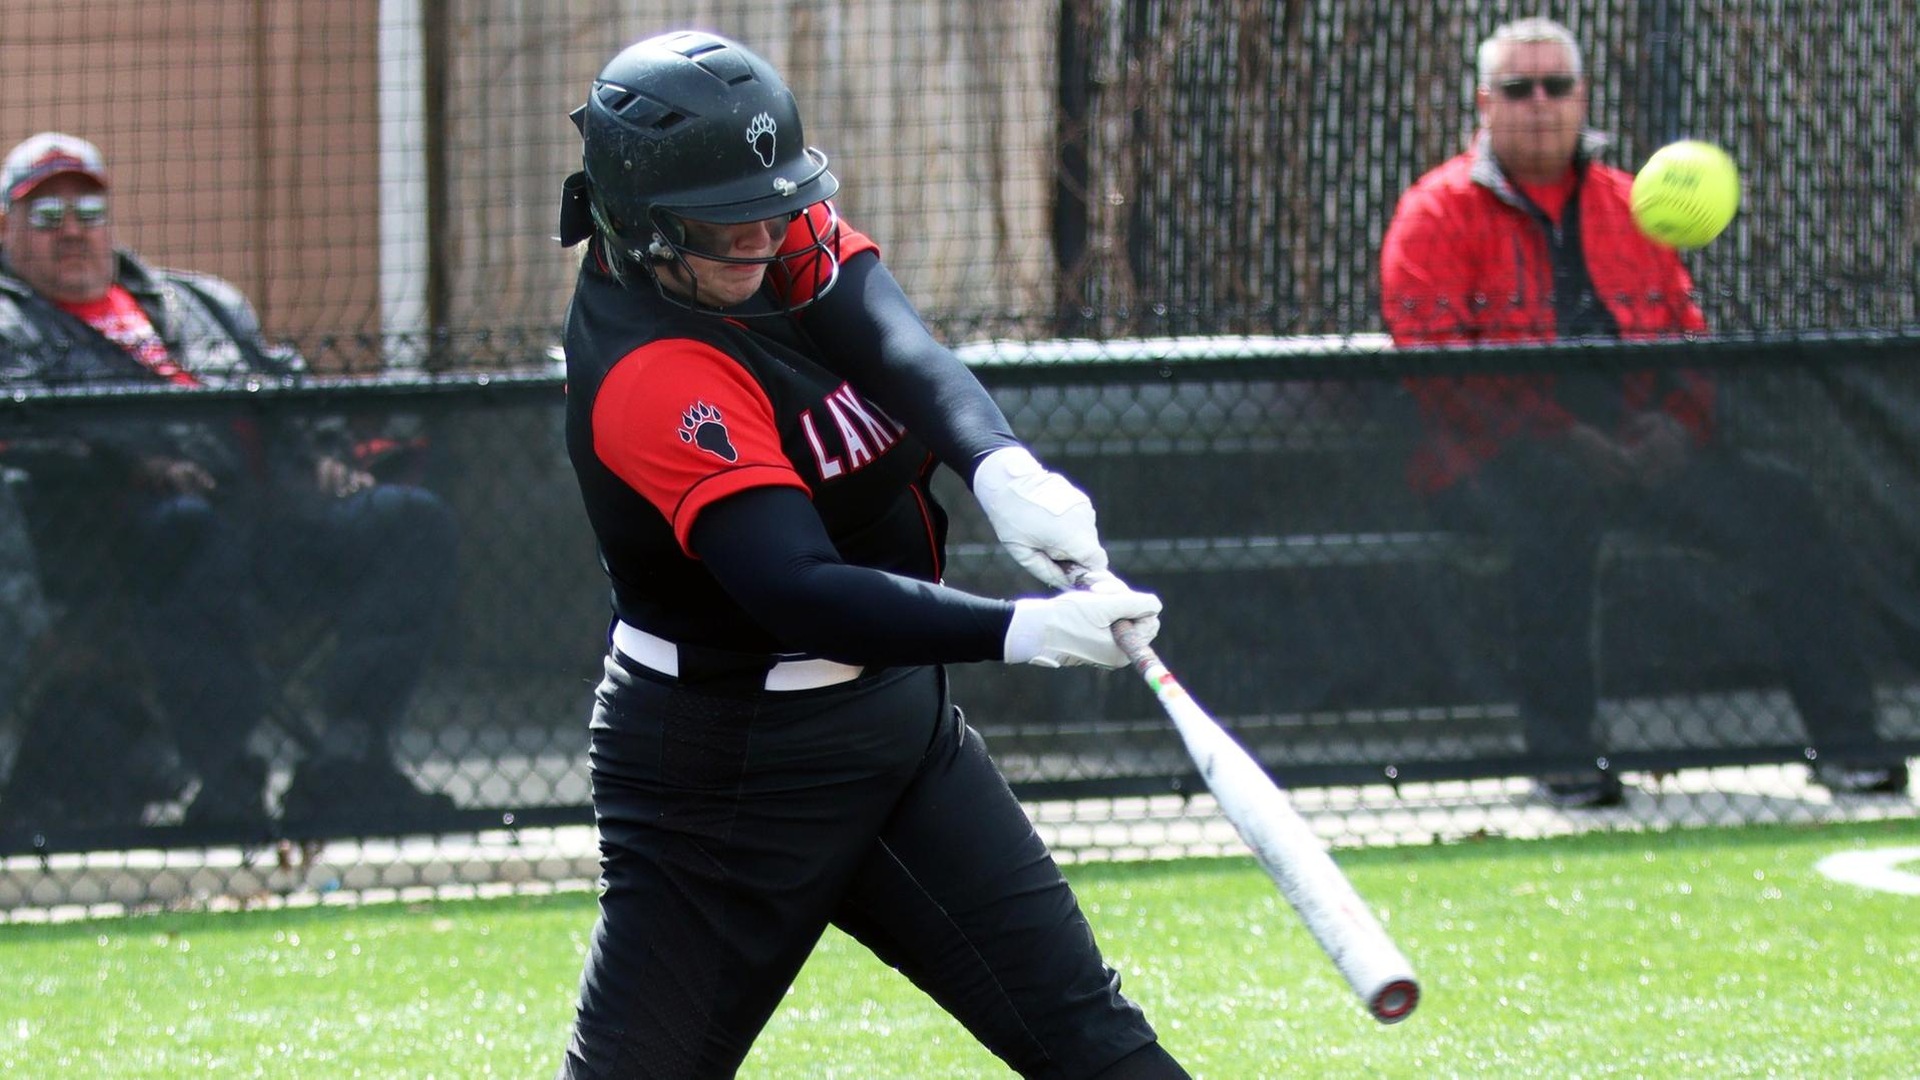 Foresters' Season Ends with Loss to Grinnell in MWC Tourney